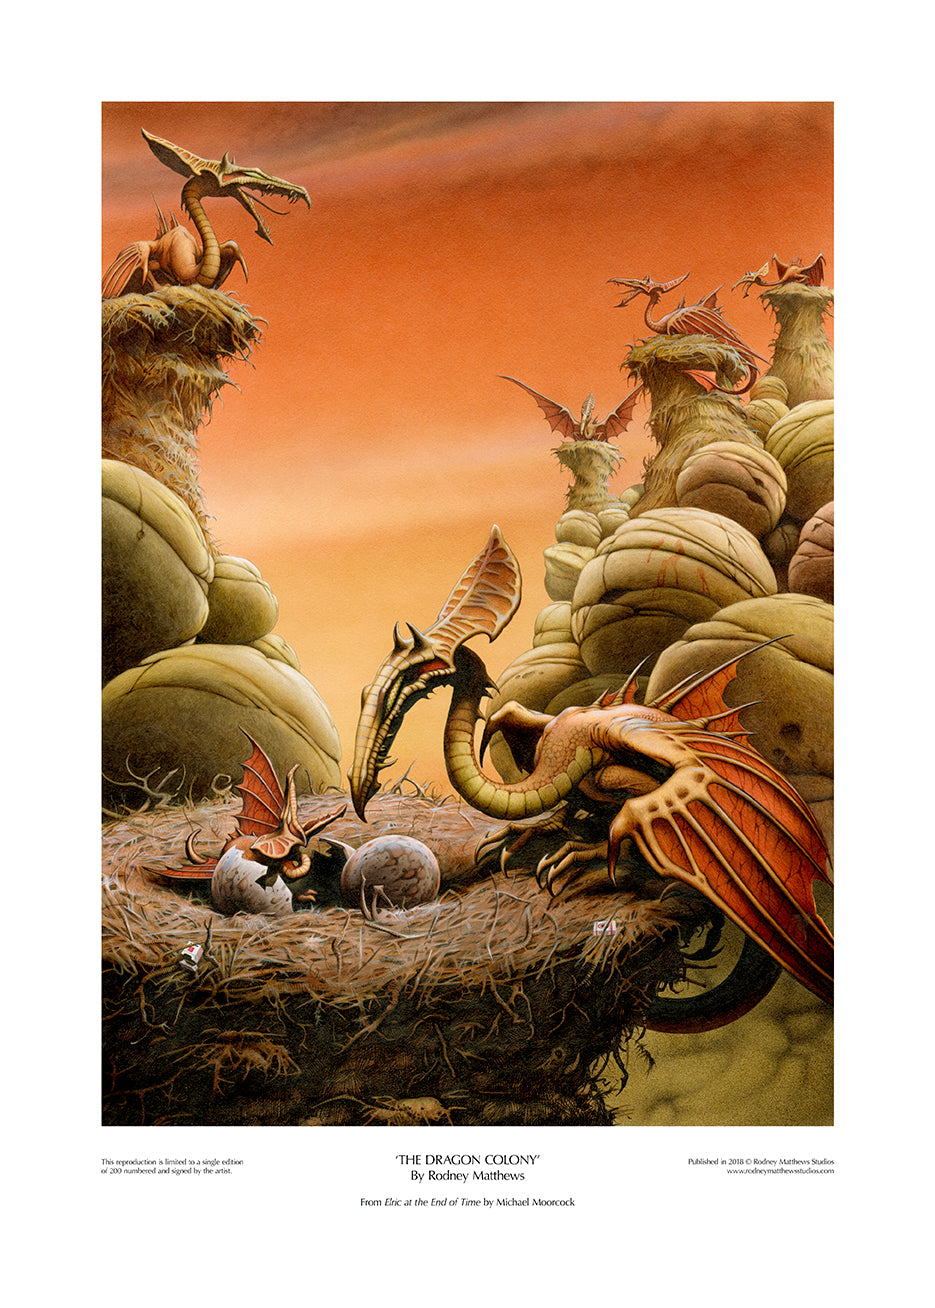 Elric at the End of Time: The Dragon Colony limited edition giclèe art print